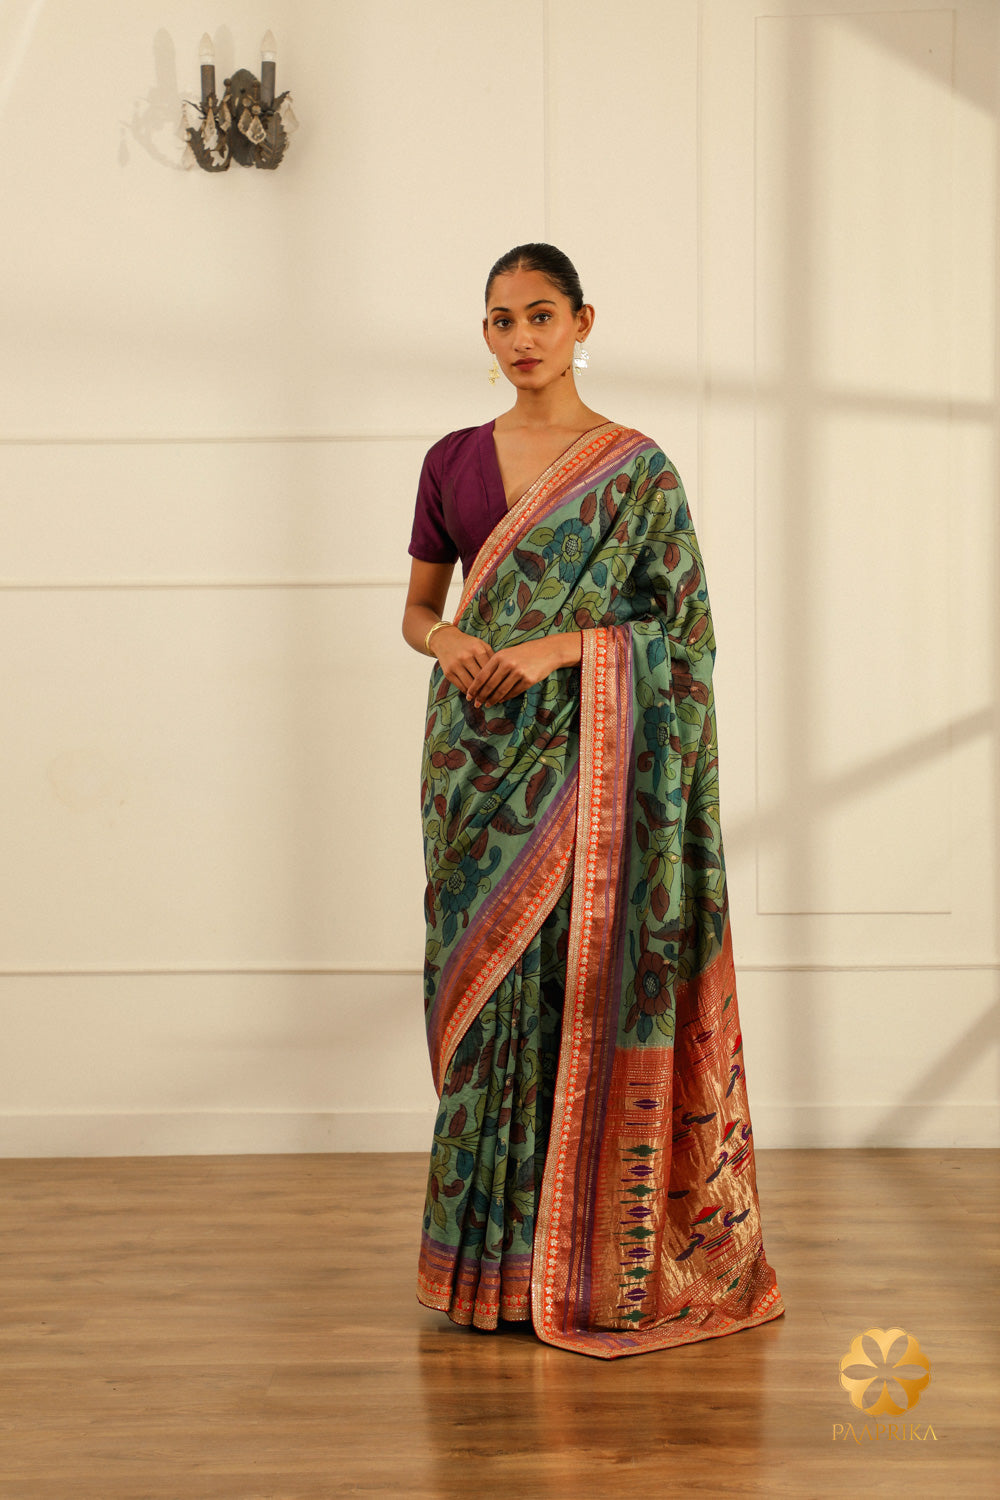 A full-length shot of a woman gracefully draped in the Aqua Blue Paithani saree, radiating elegance and artistry.